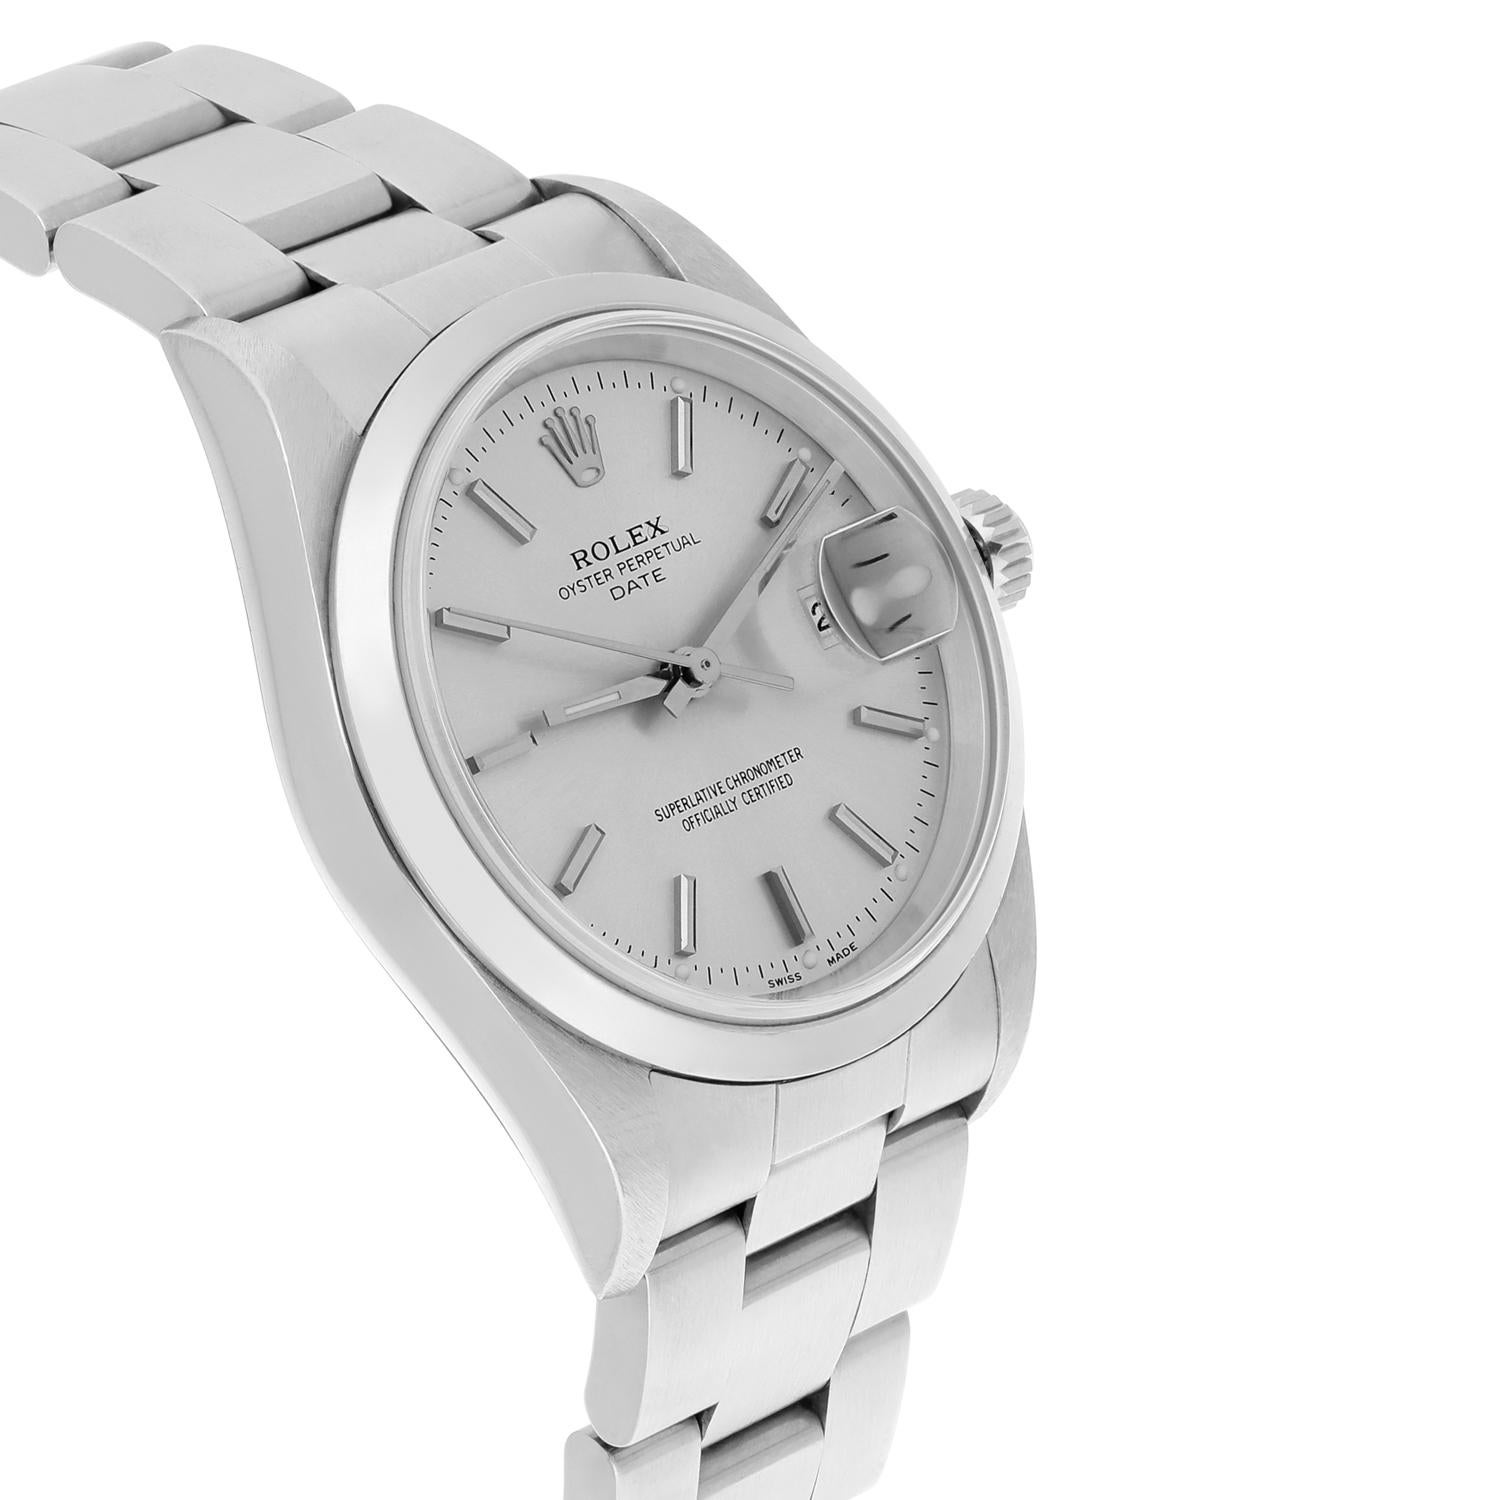 Rolex Date 34mm Stainless Steel Watch Oyster Band Silver Dial Circa 2001 15200 Excellent état - En vente à New York, NY